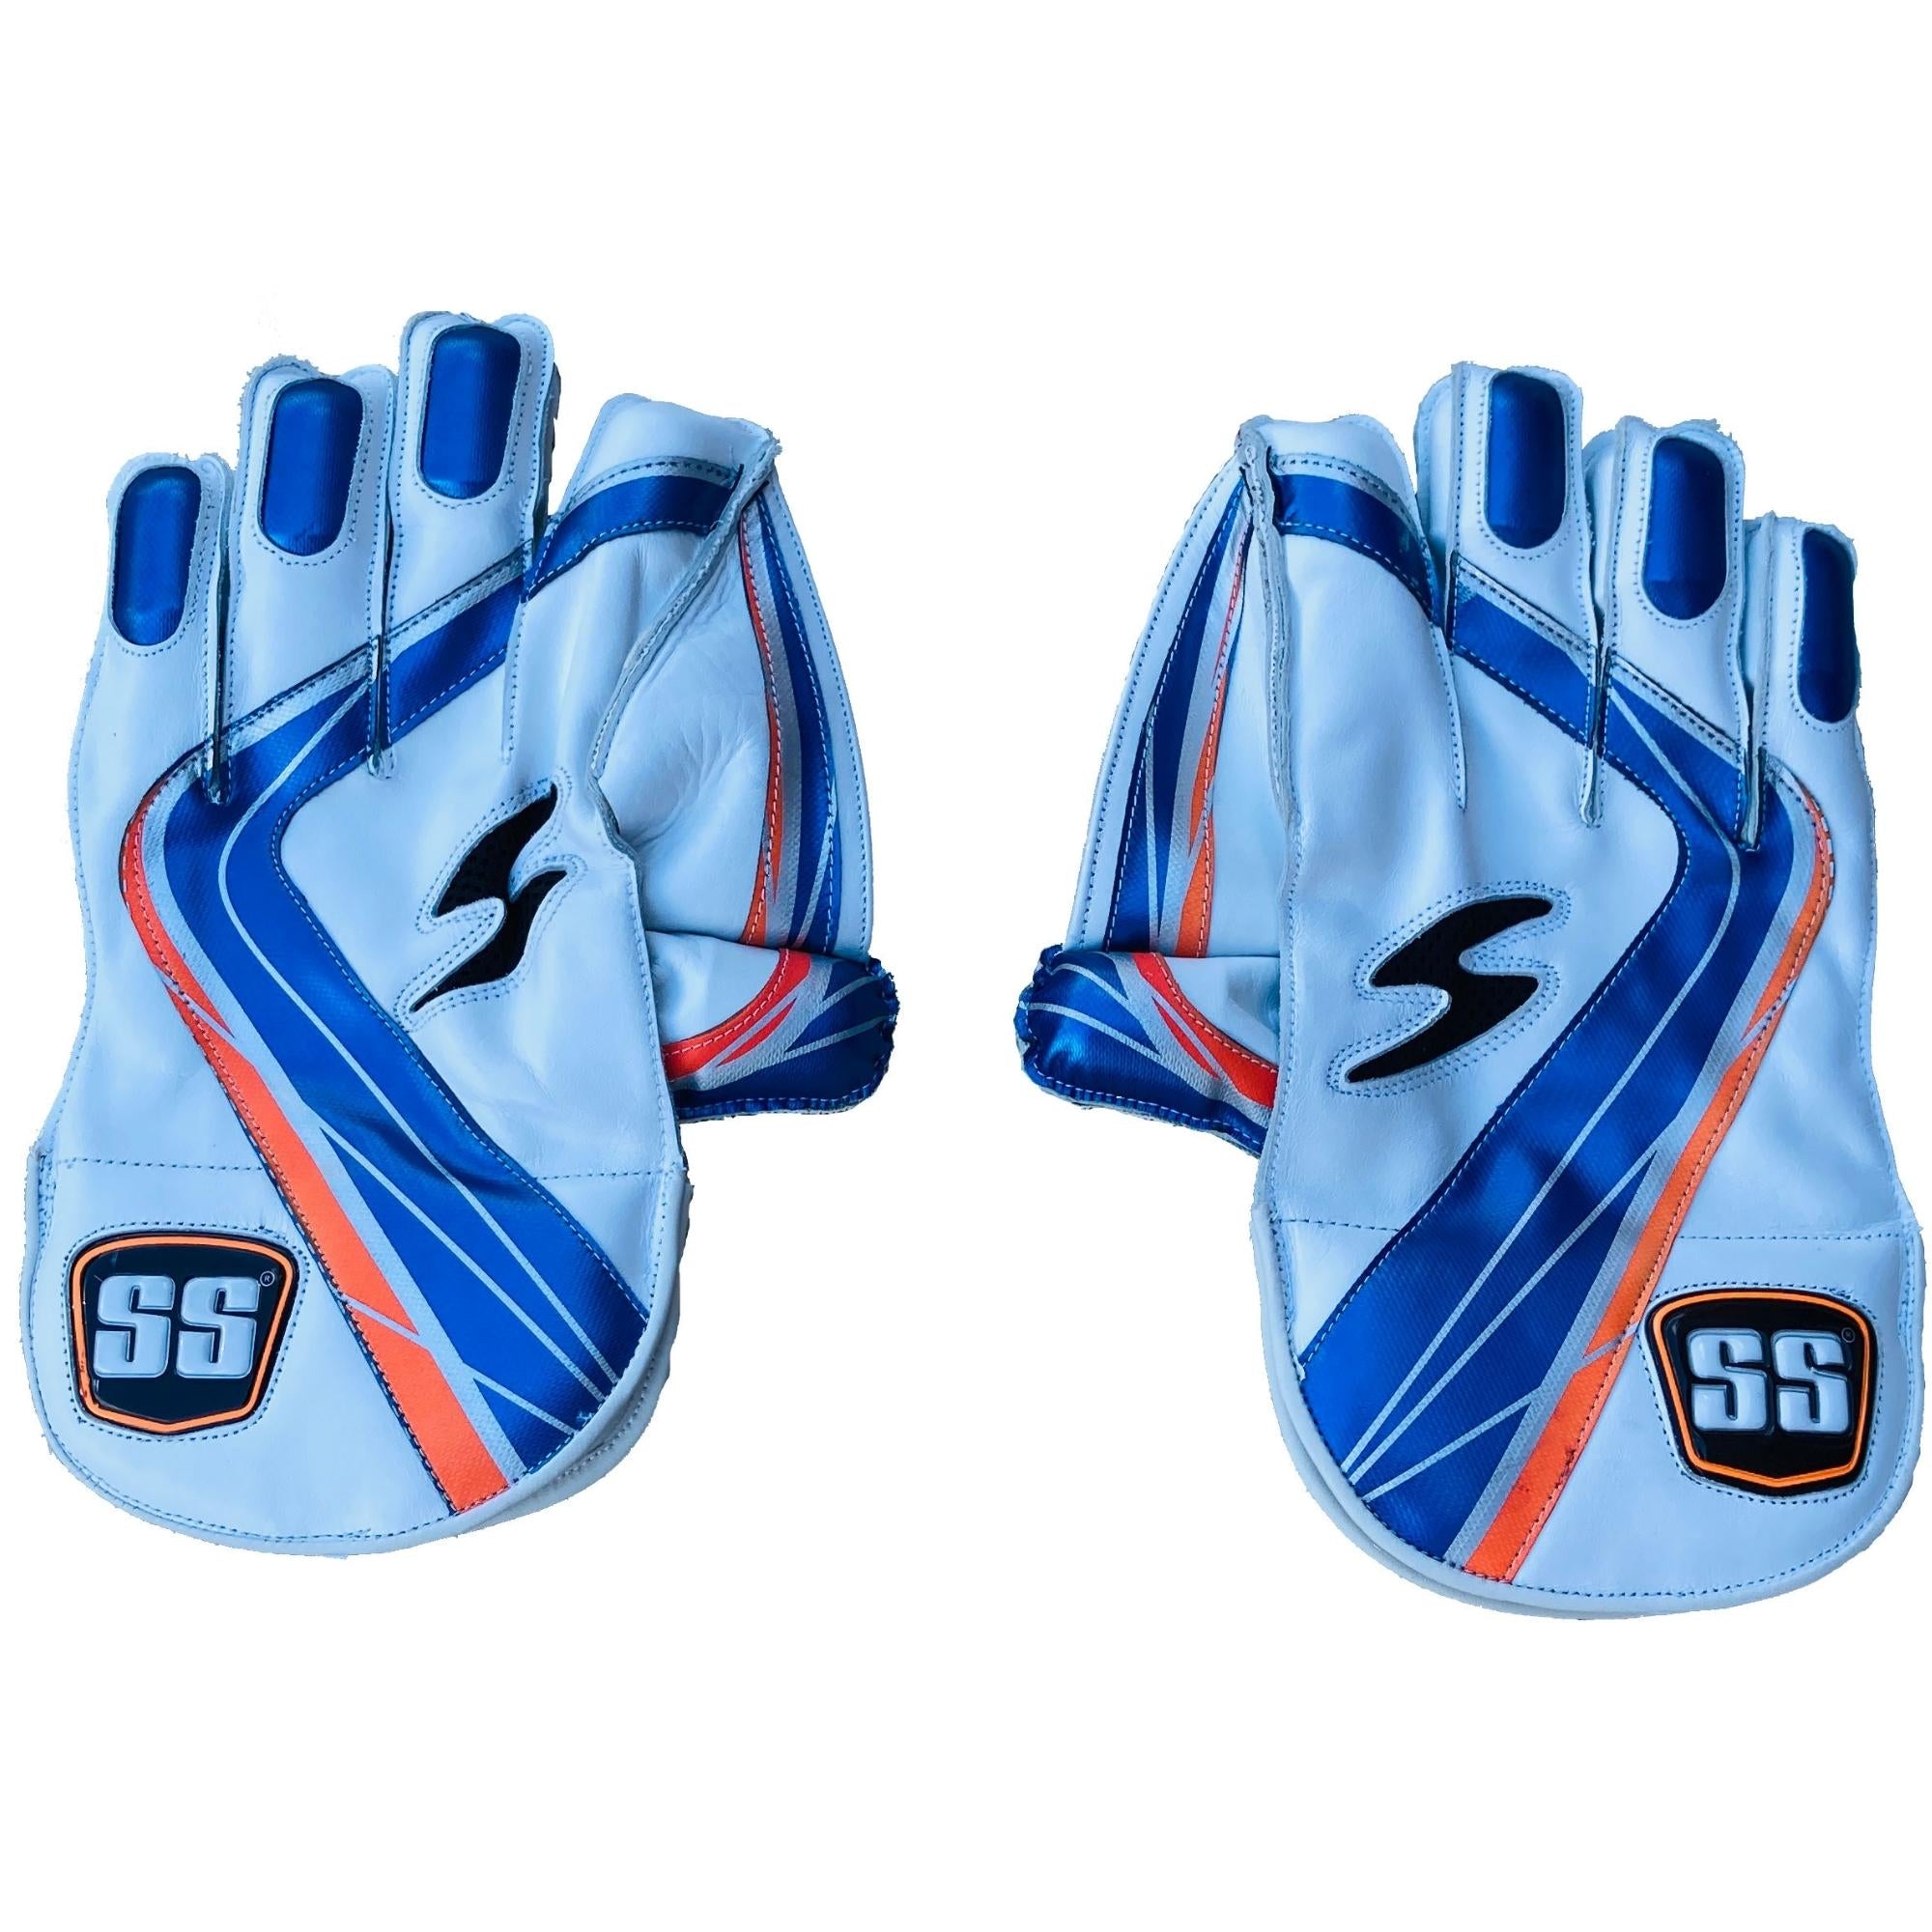 SS Wicket Keeping Gloves | SS Professional